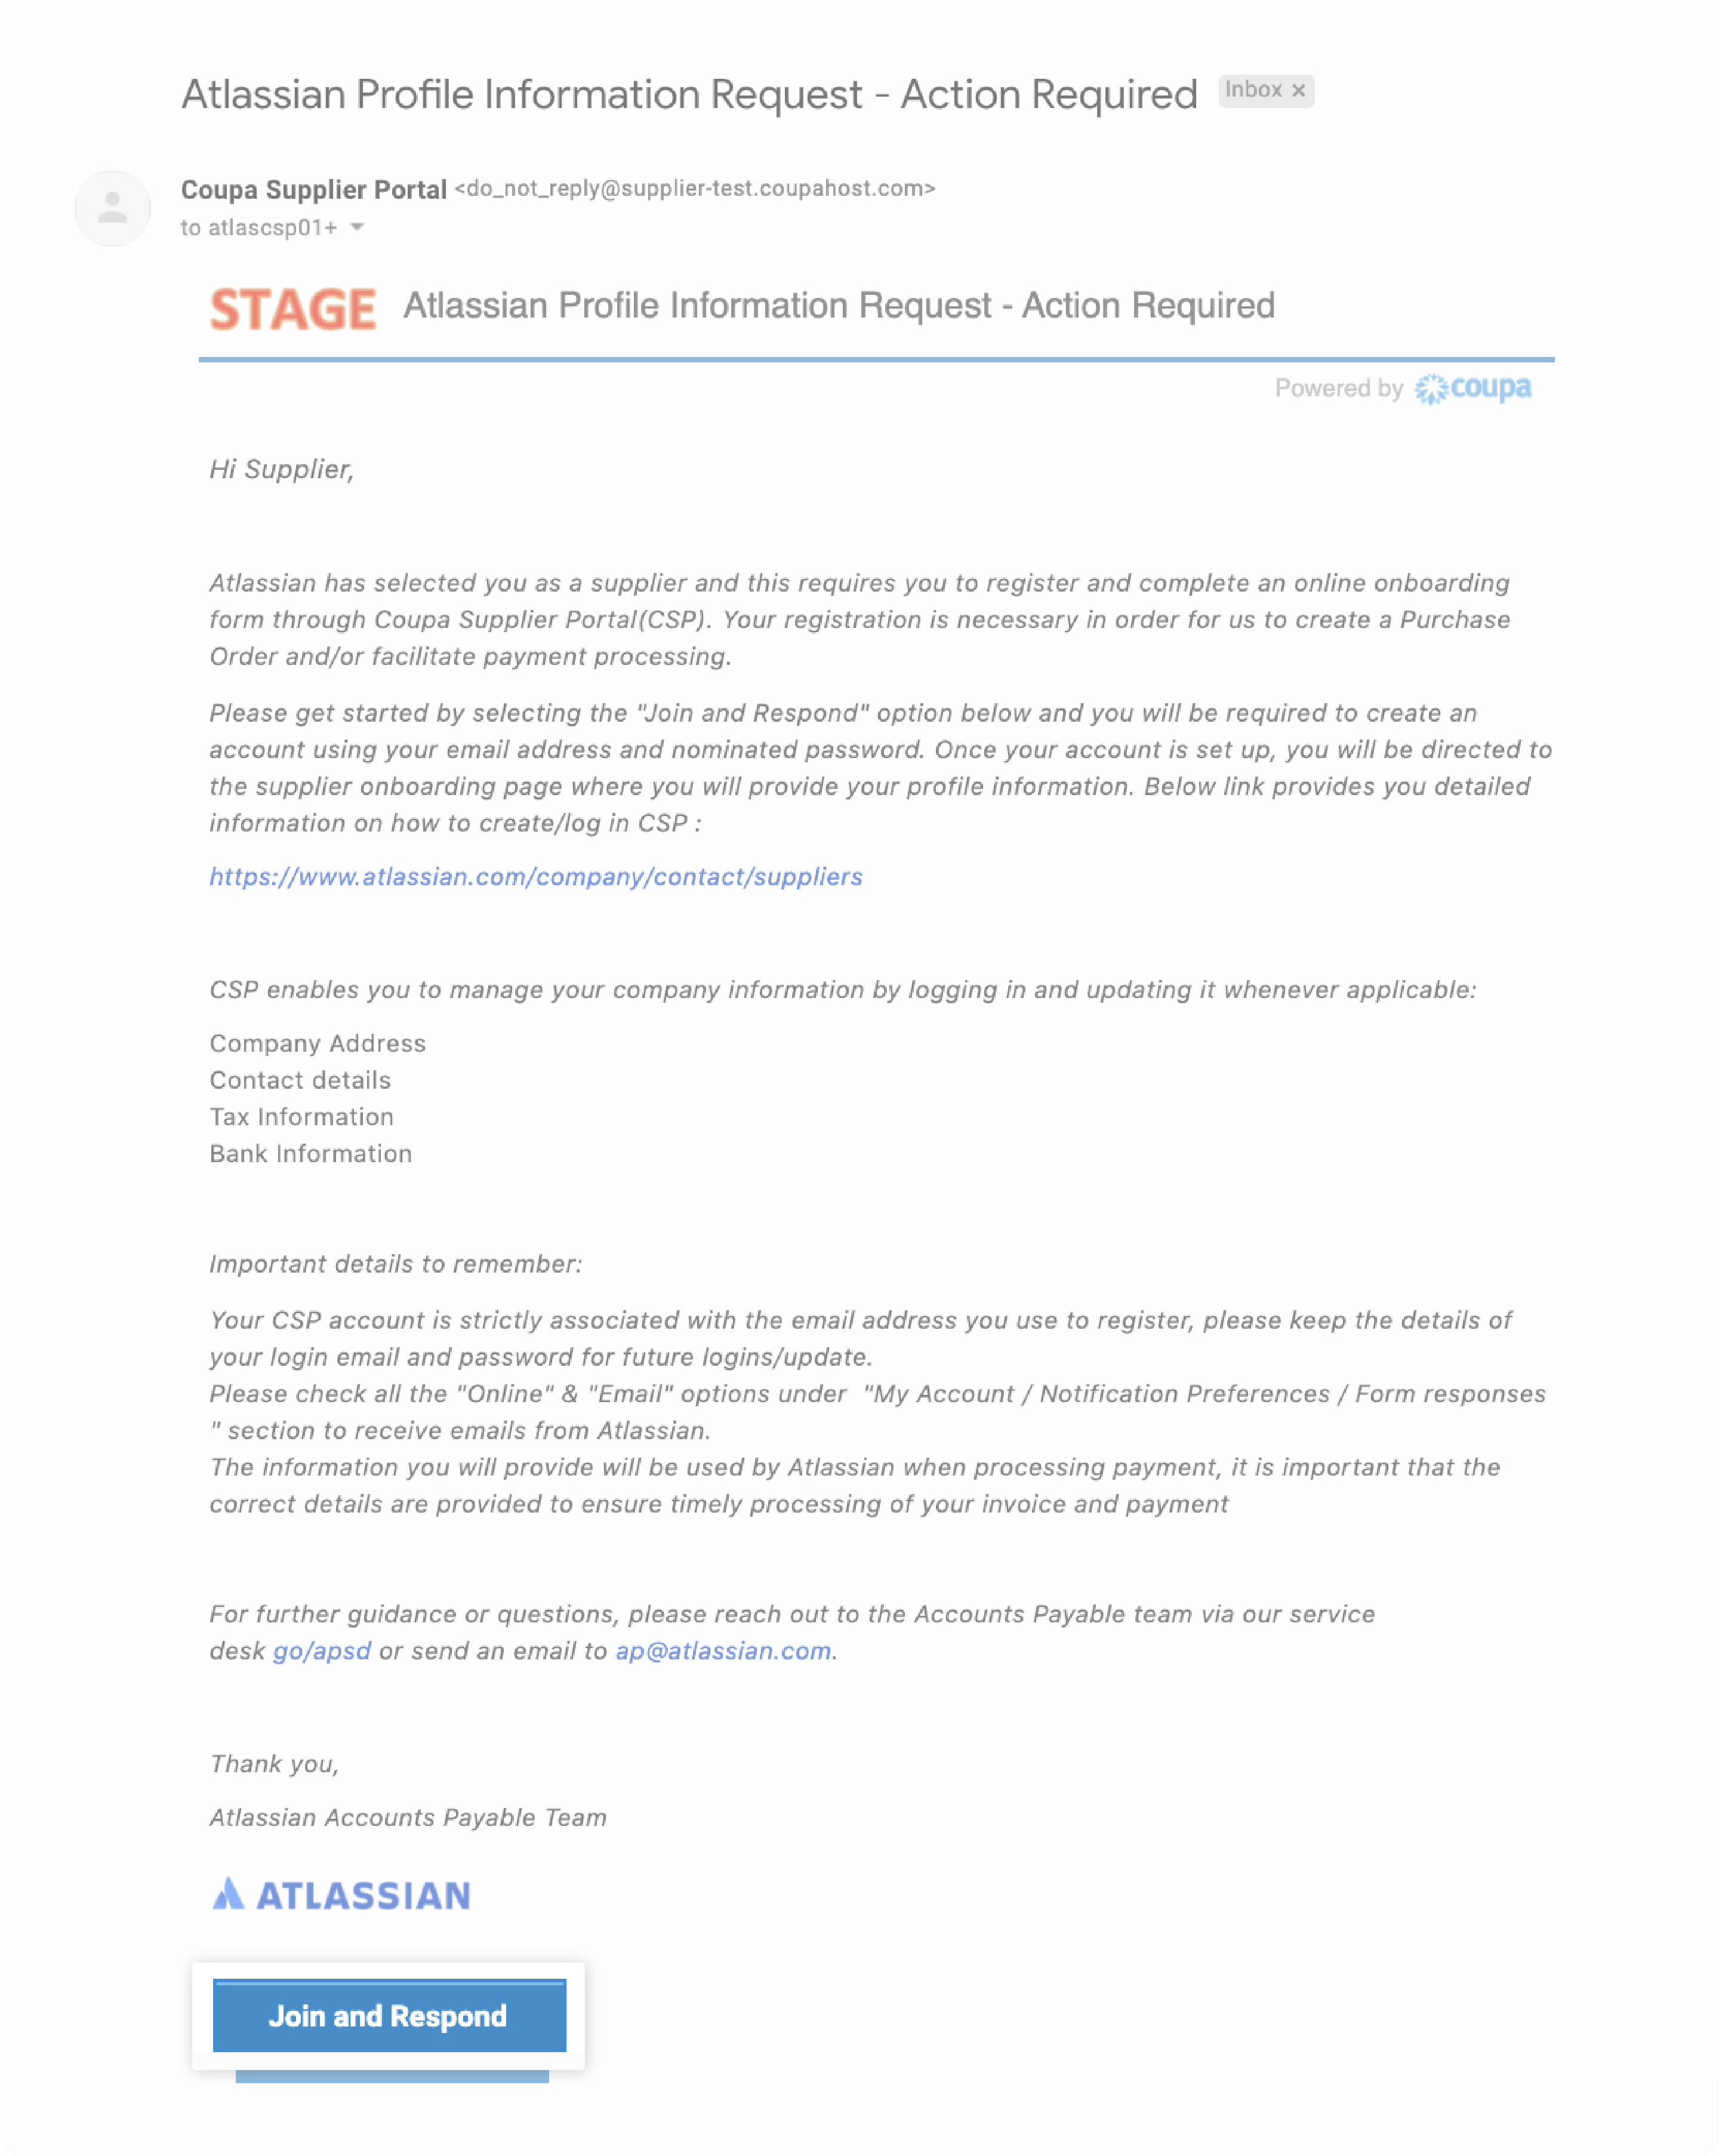 Atlassian Profile Information Request Action Required email